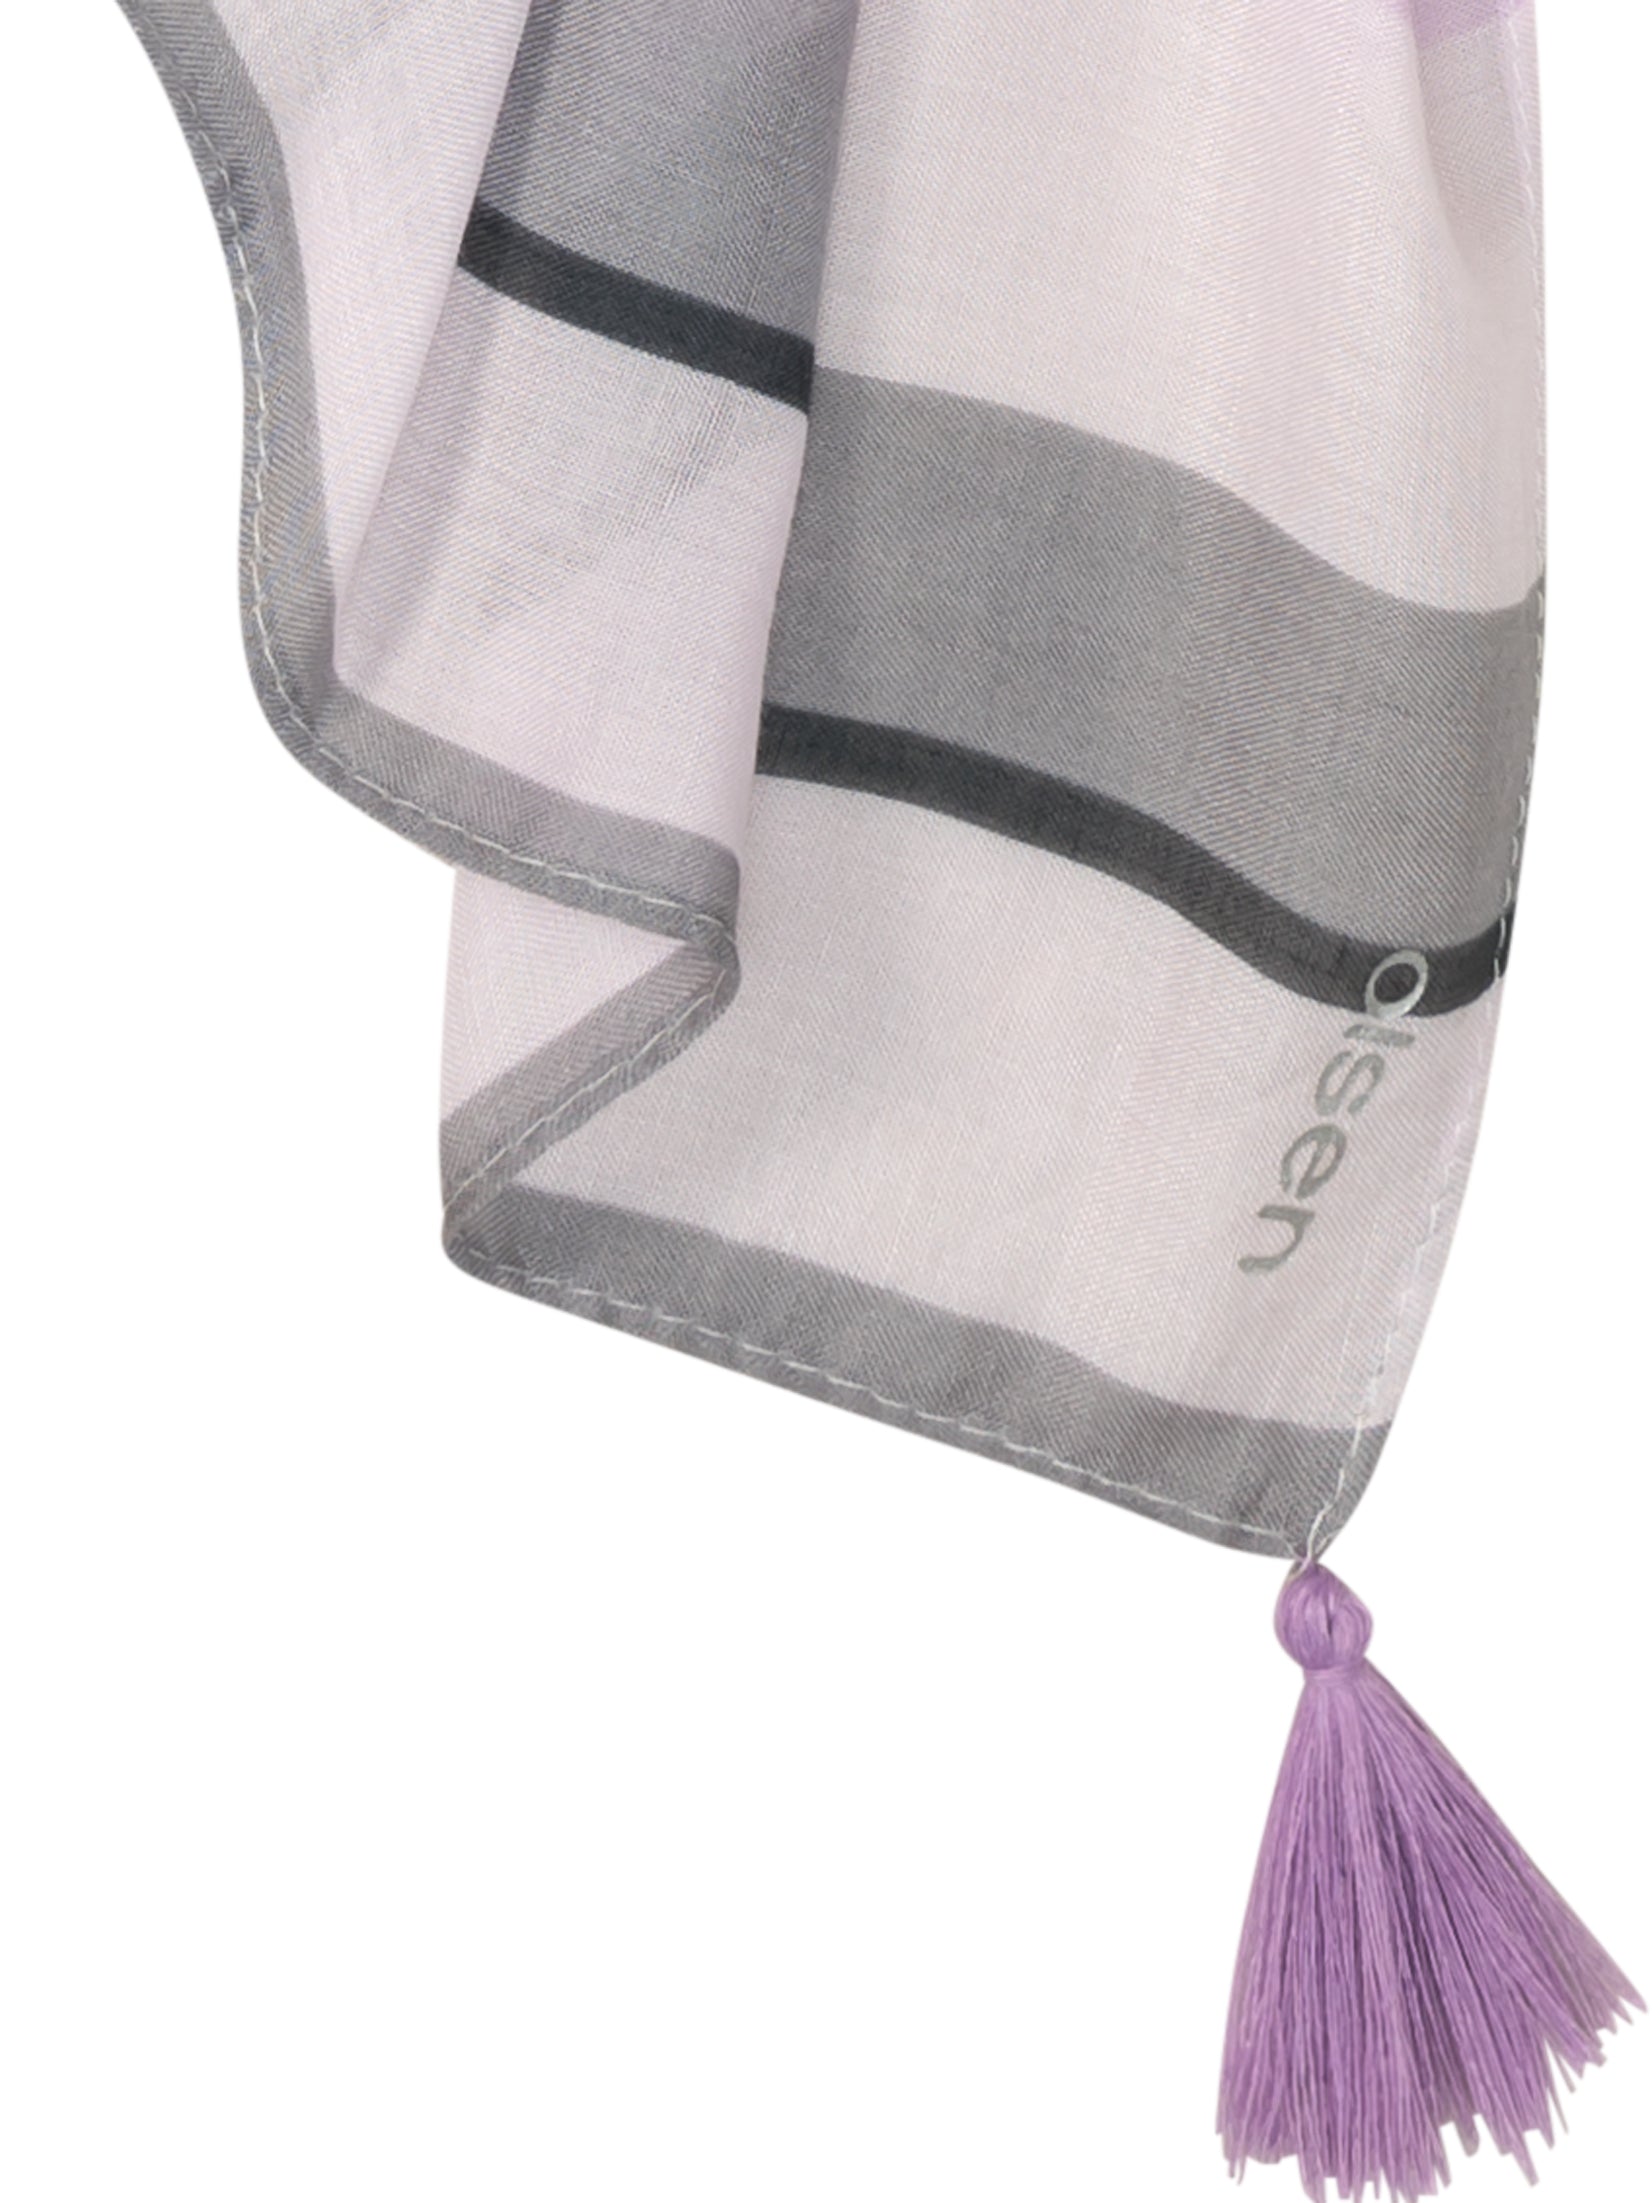 Woven Scarf in Soft Lilac